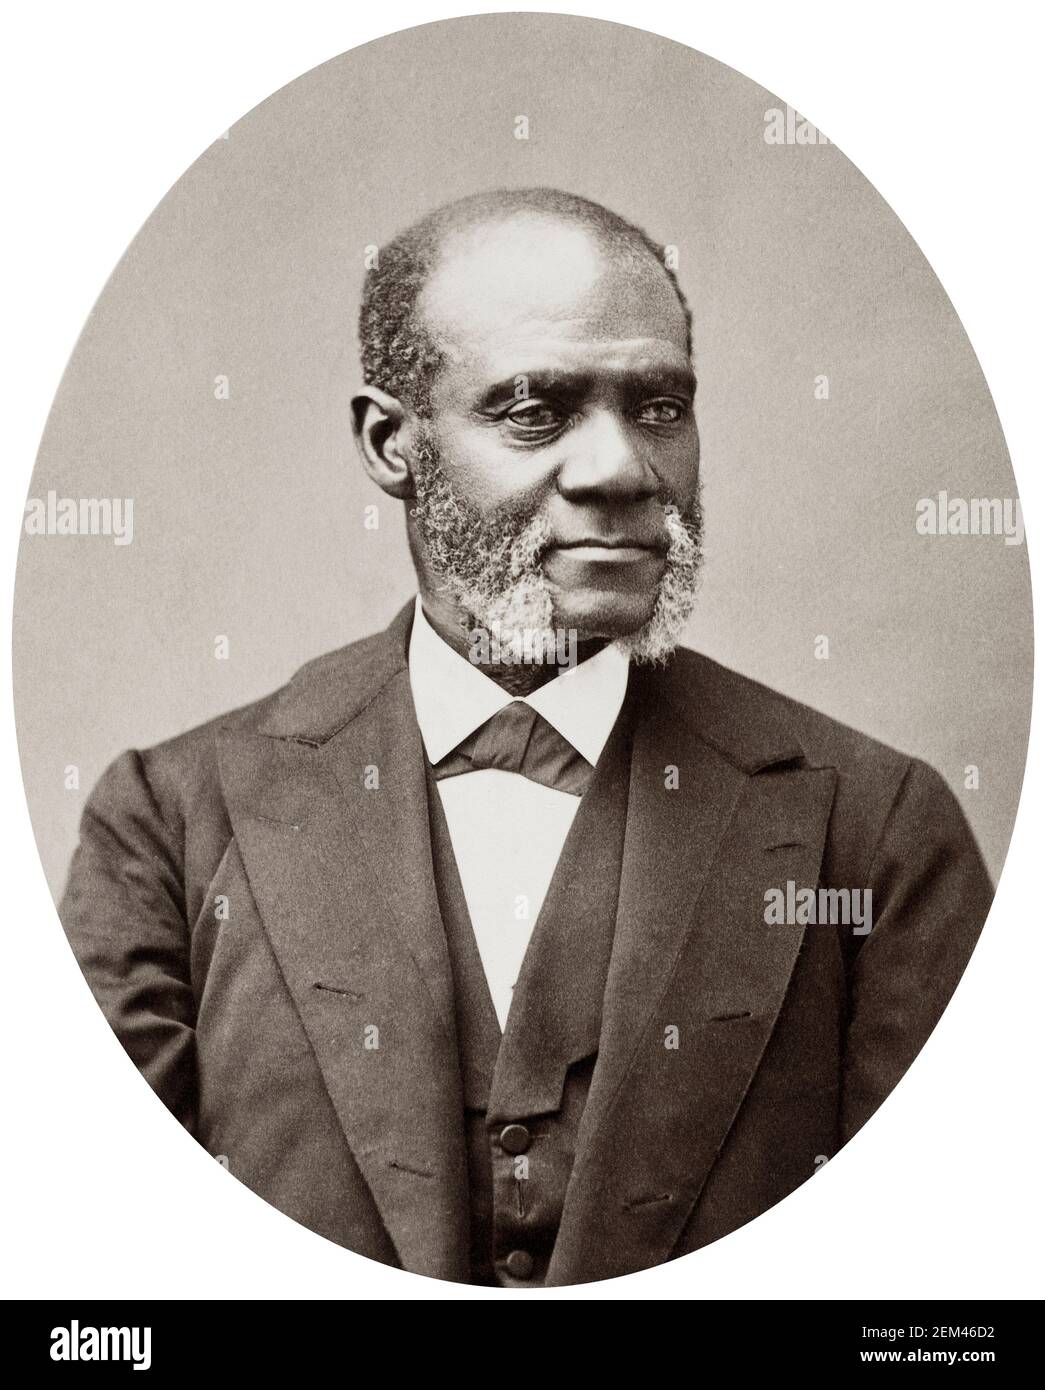 Henry Highland Garnet (1815-1882), African-American, Slave Trade  Abolitionist, Minister, educator and orator, portrait photograph by James U Stead, circa 1881 Stock Photo